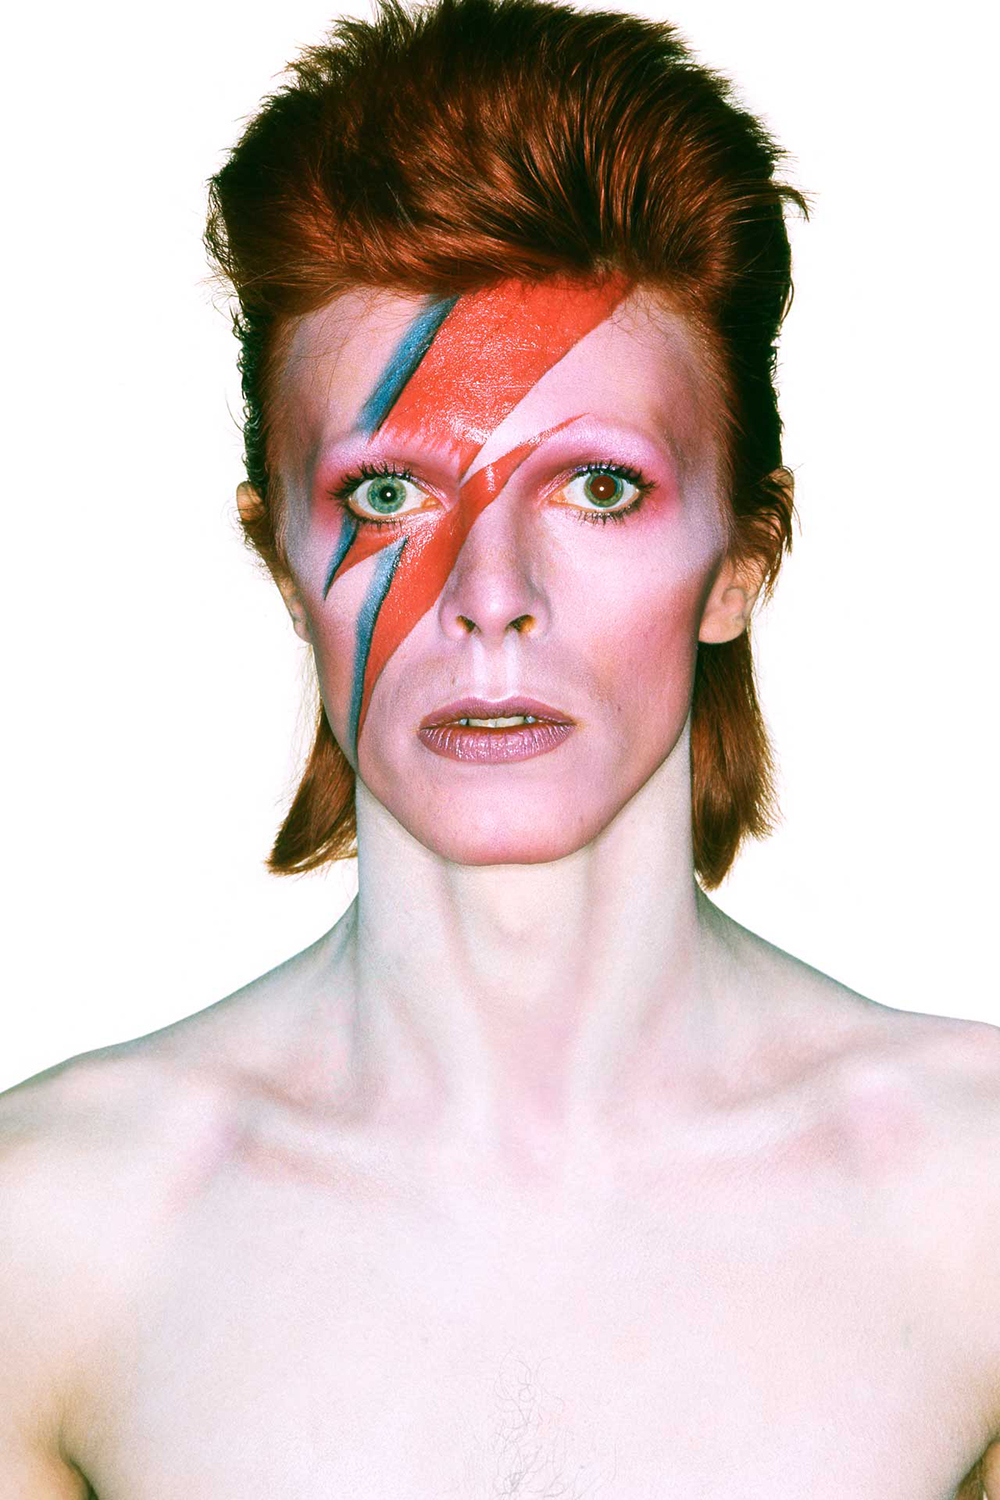 This iconic portrait by photographer Brian Duffy in 1973 was the album cover for Aladdin Sane.